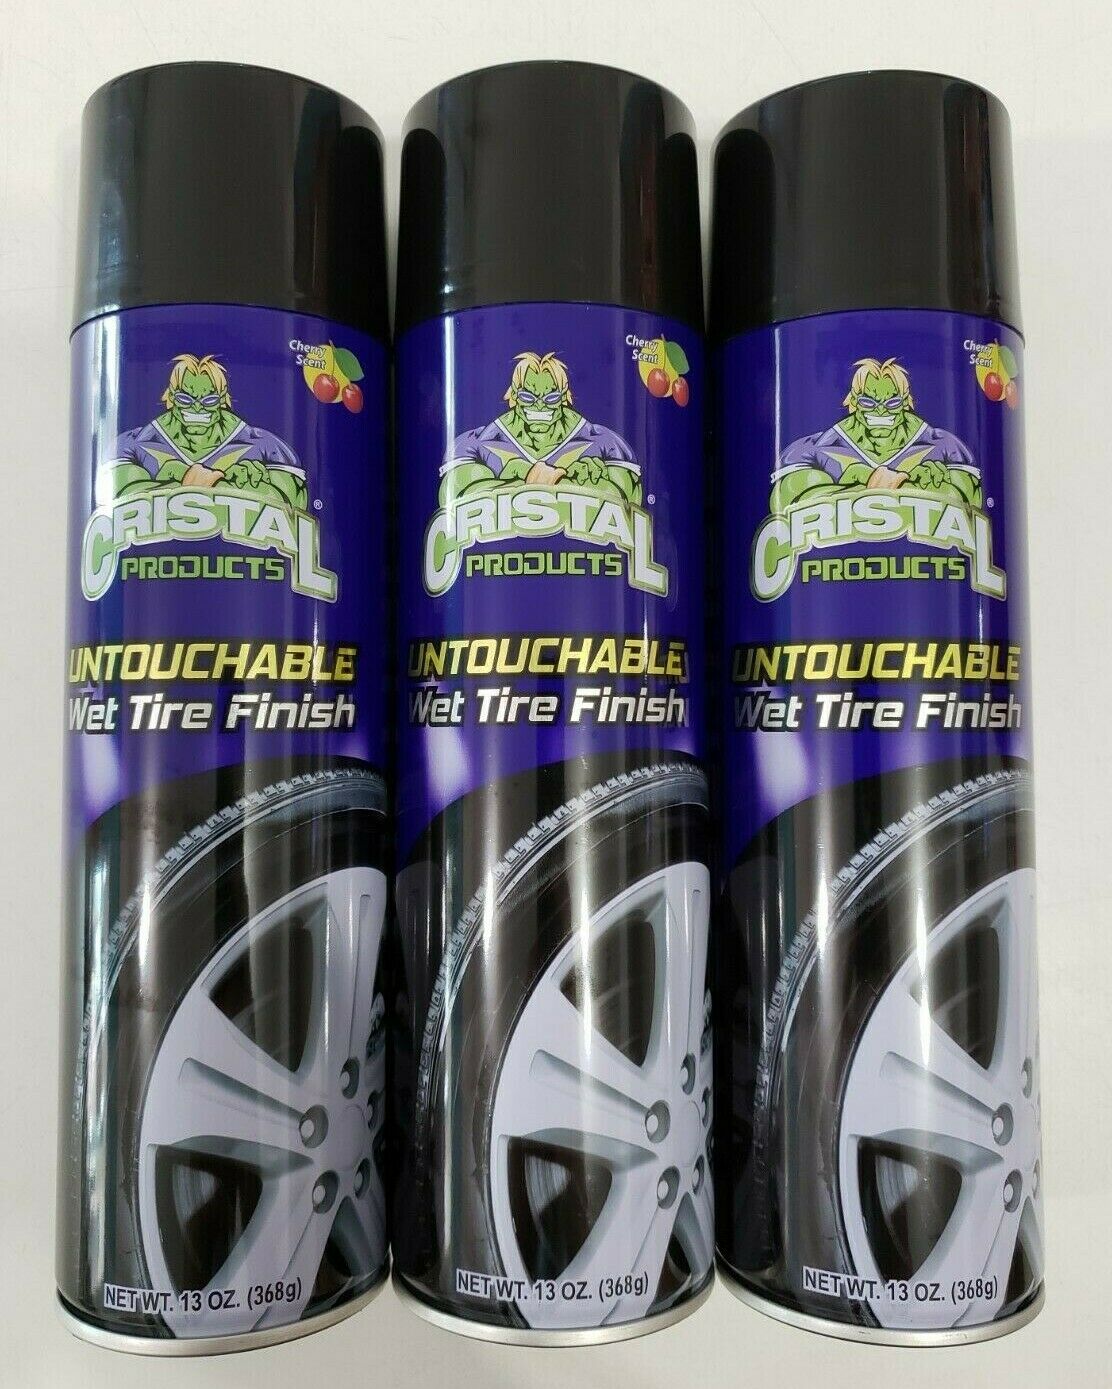 Cristal Products Untouchable Wet Tire Finish 13oz Pack Of 3 Ever Wet Look